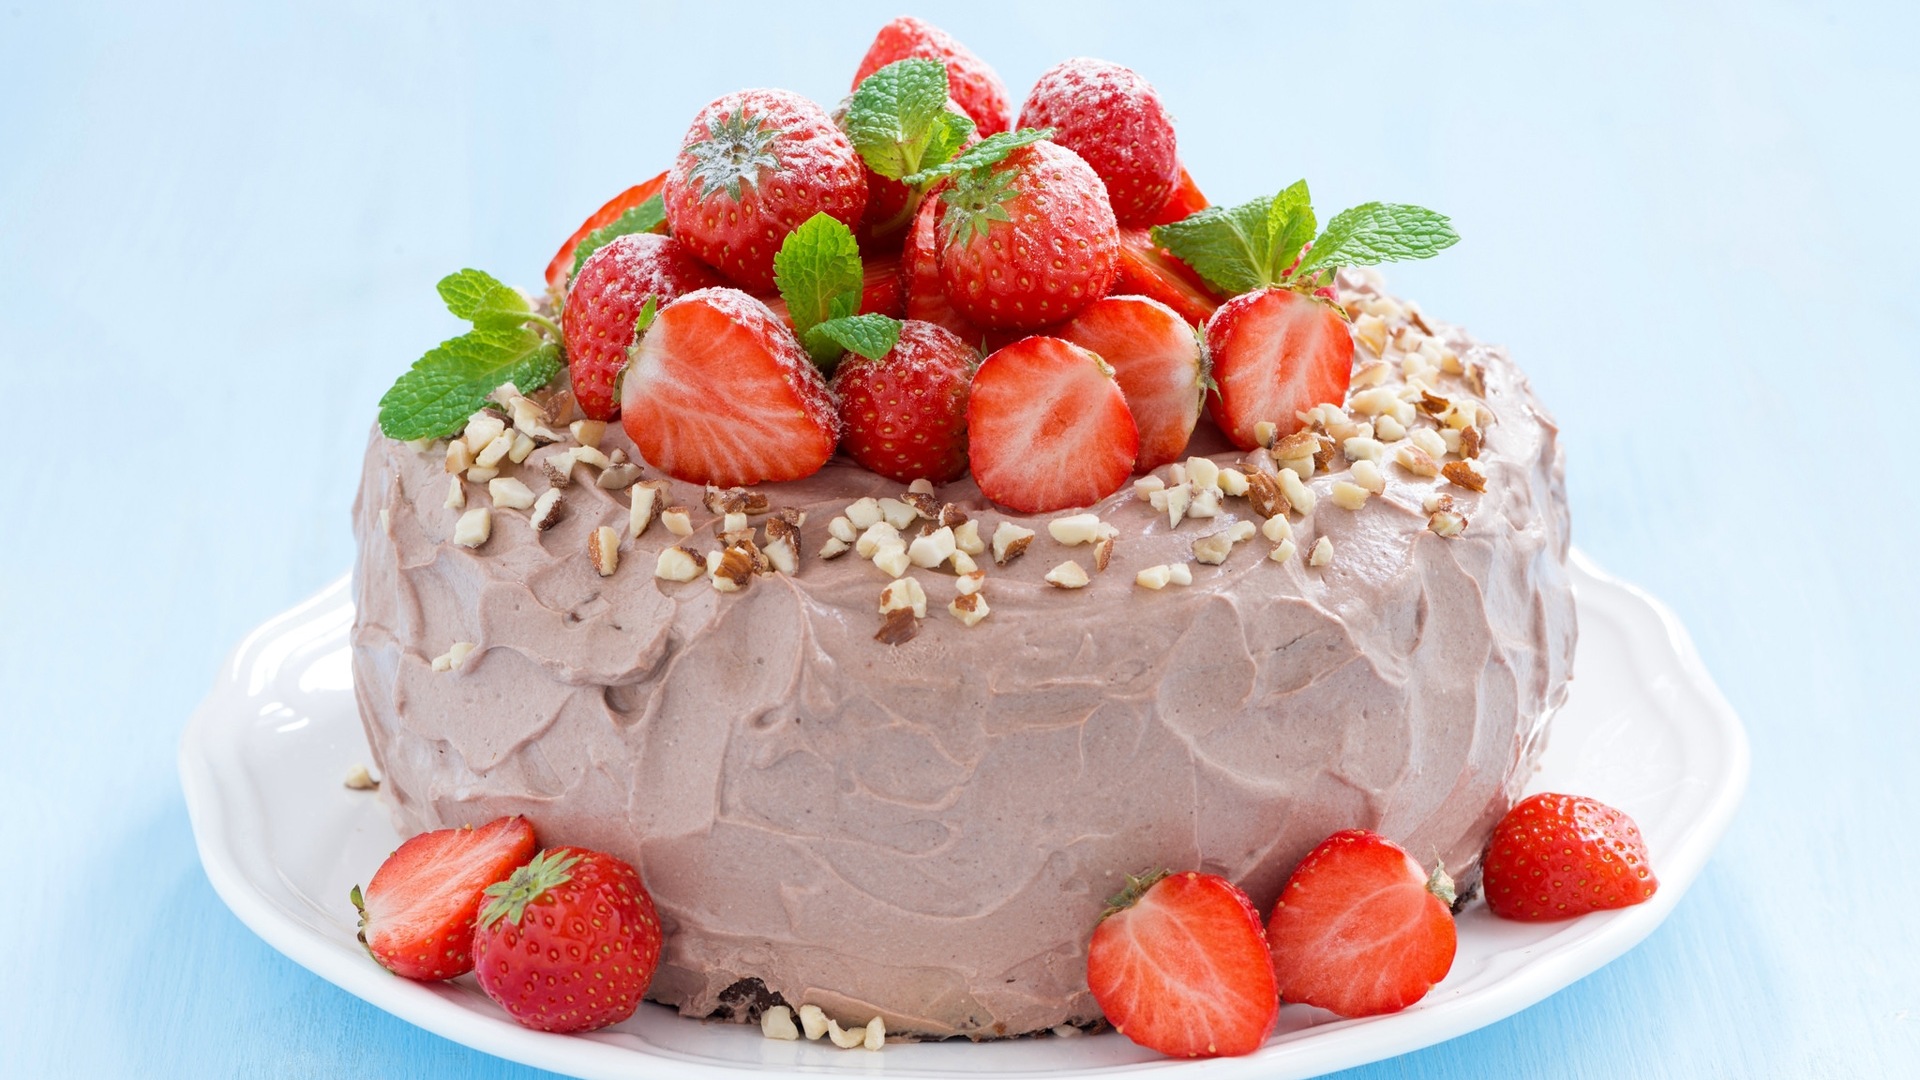 Delicious strawberry cake HD wallpapers #18 - 1920x1080